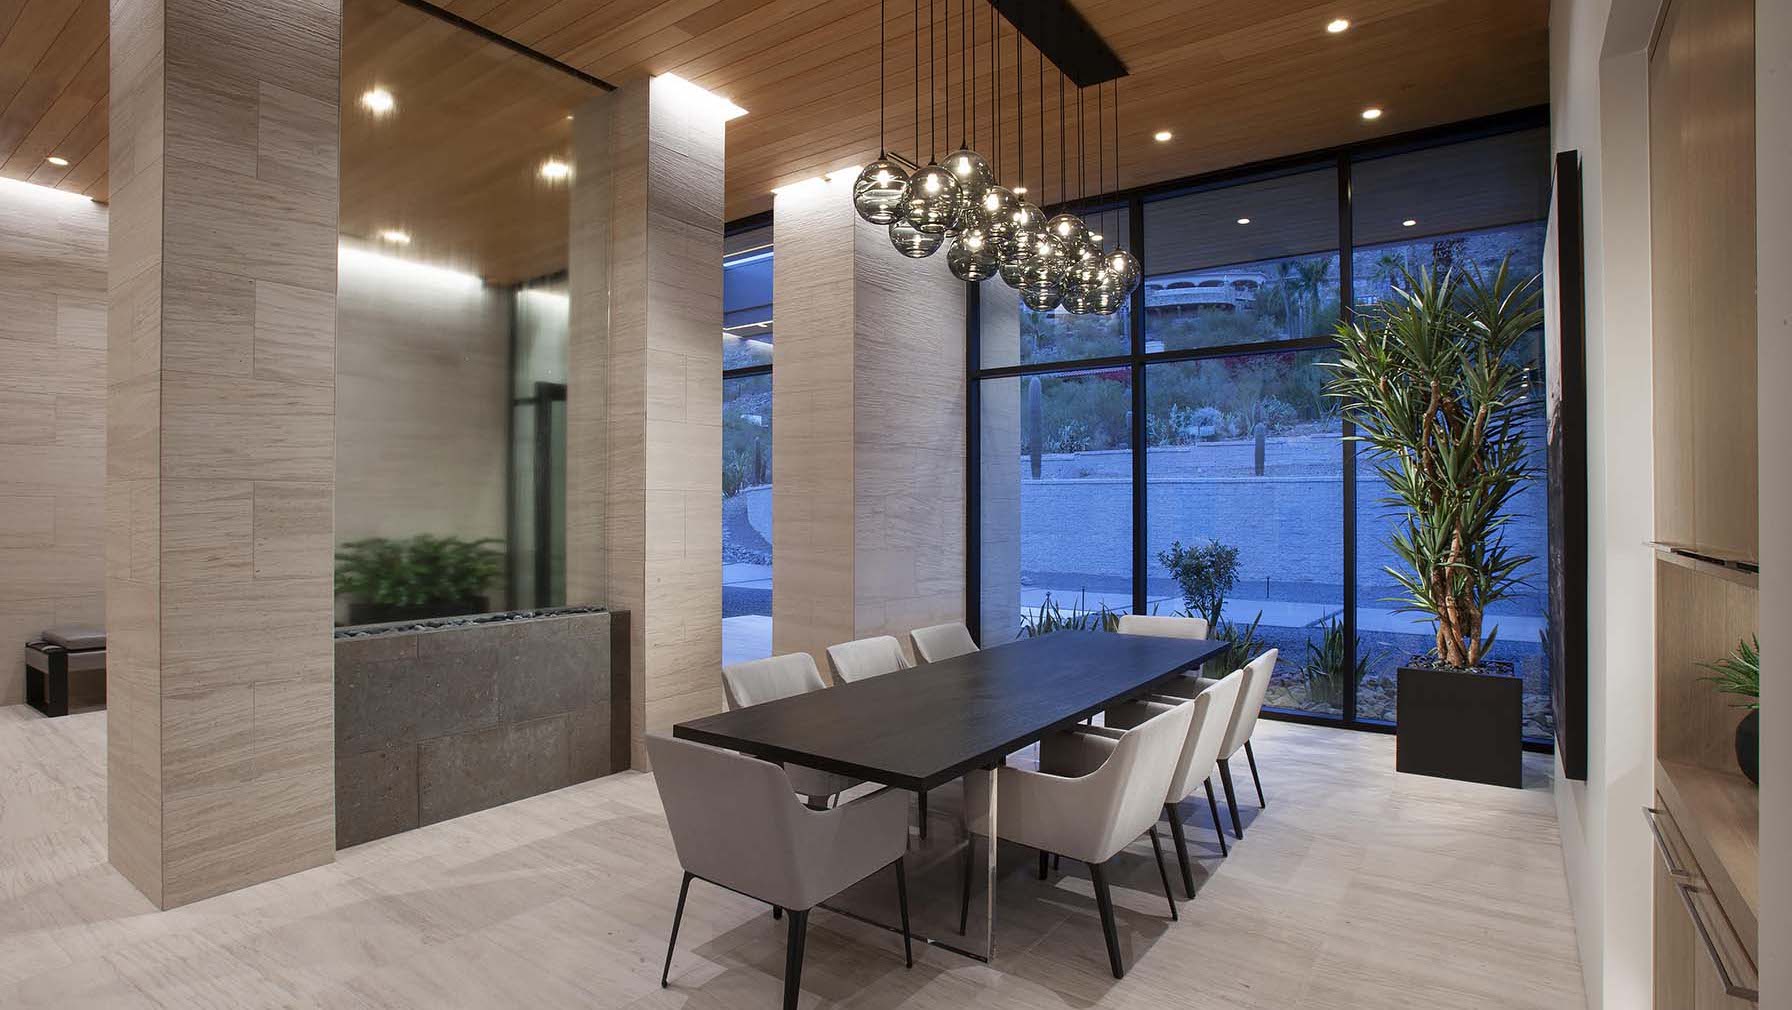 Now and Zen dining roomAZ Masonry Award Located in Scottsdale Ariz Drewett Works is an award winning architecture firm specializing in luxury residential hospitality and commercial architecture